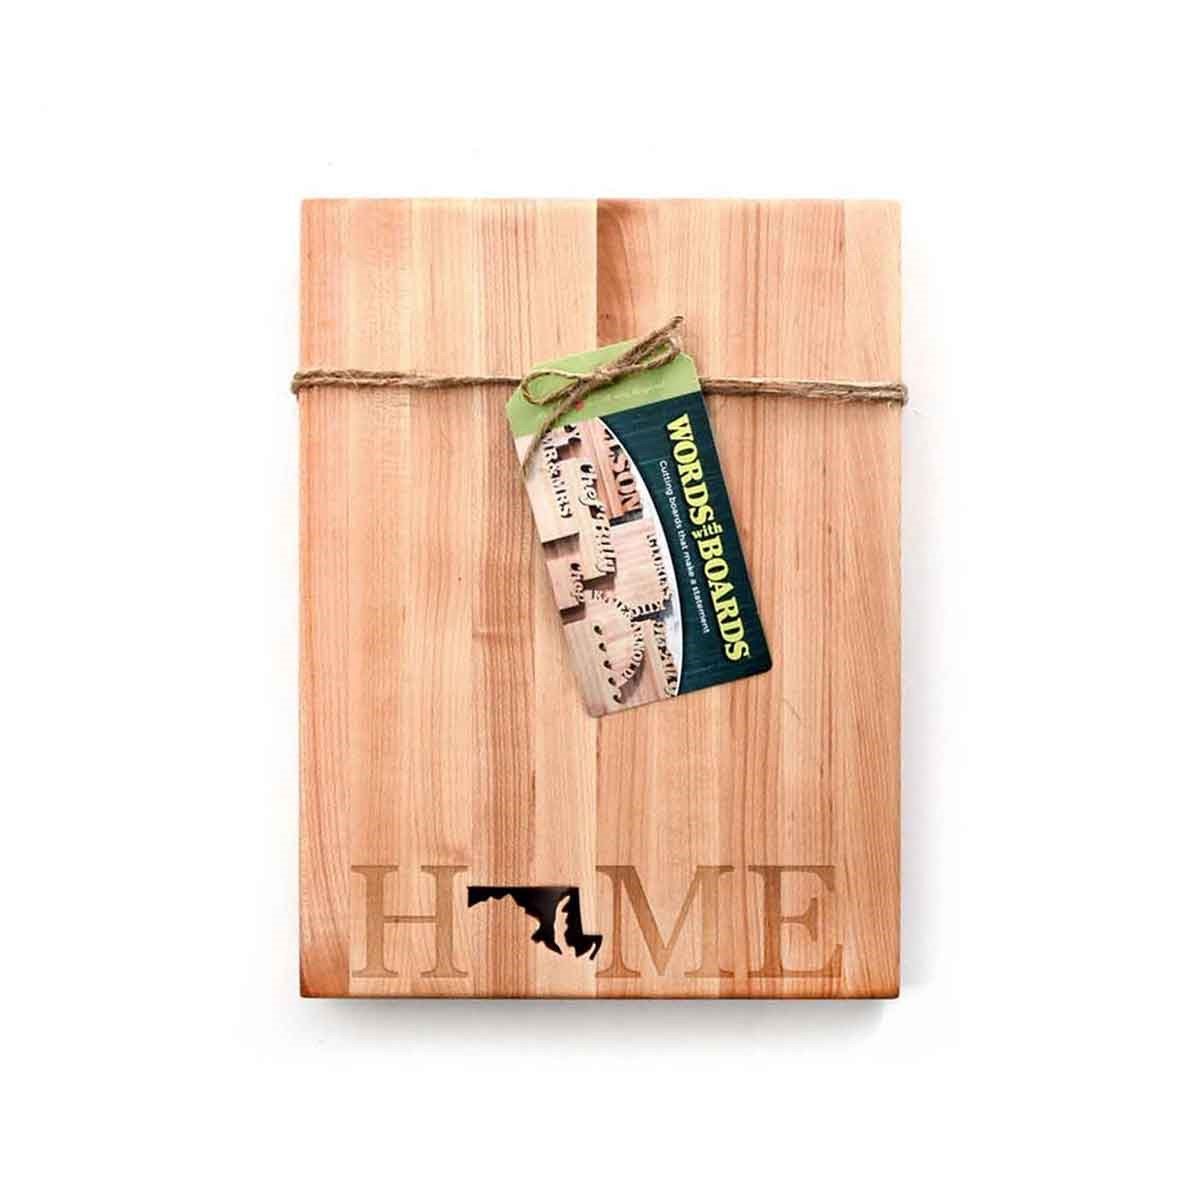 Solid Wood Cutting Boards You Must Have - I Read Labels For You